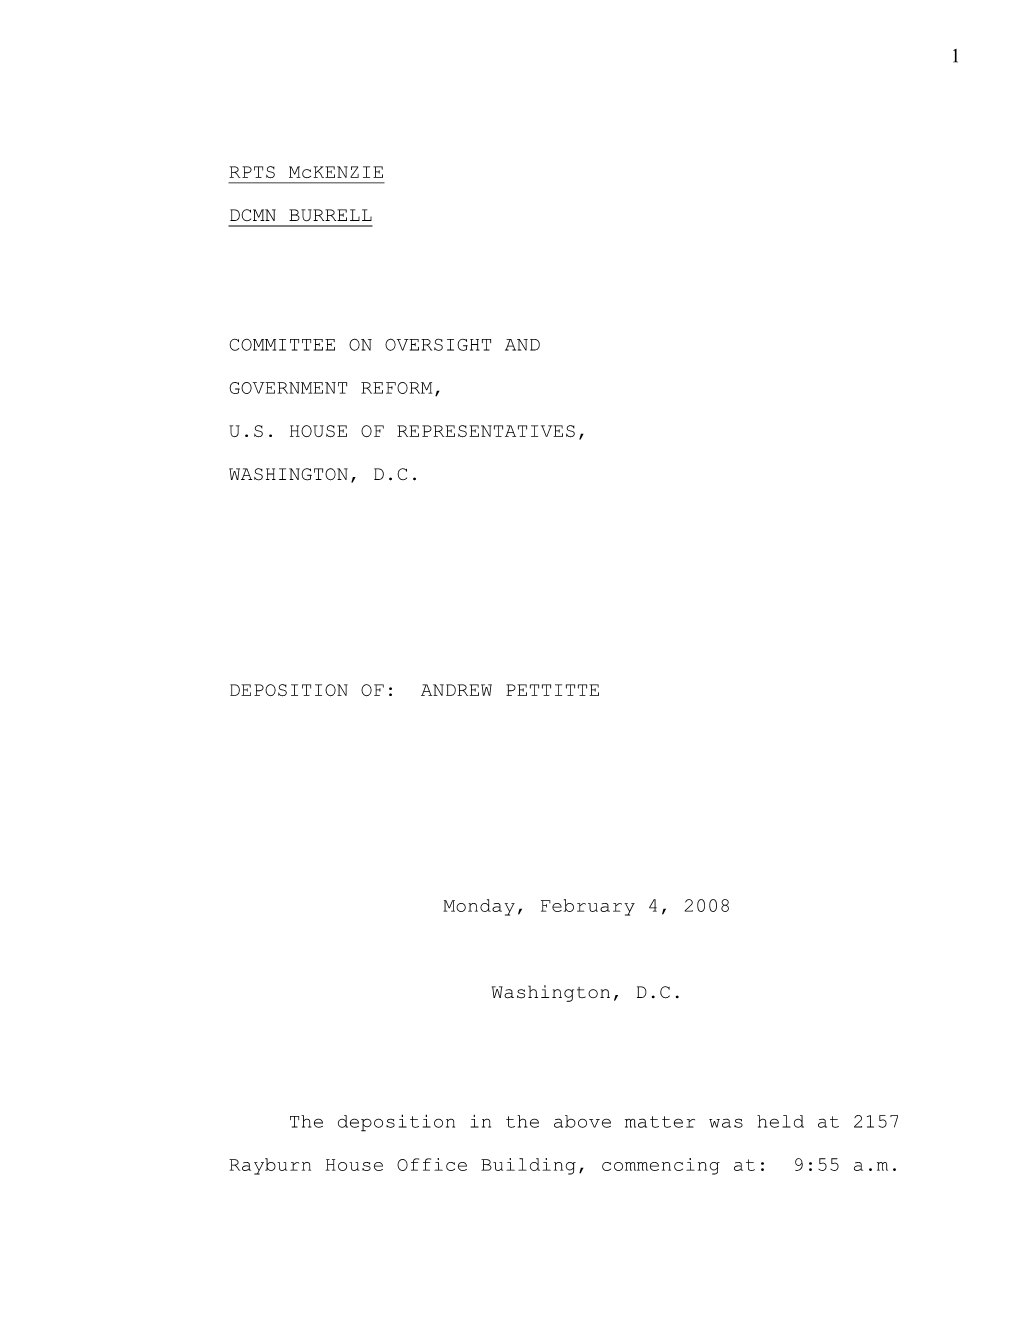 Committee Deposition of Andy Pettitte